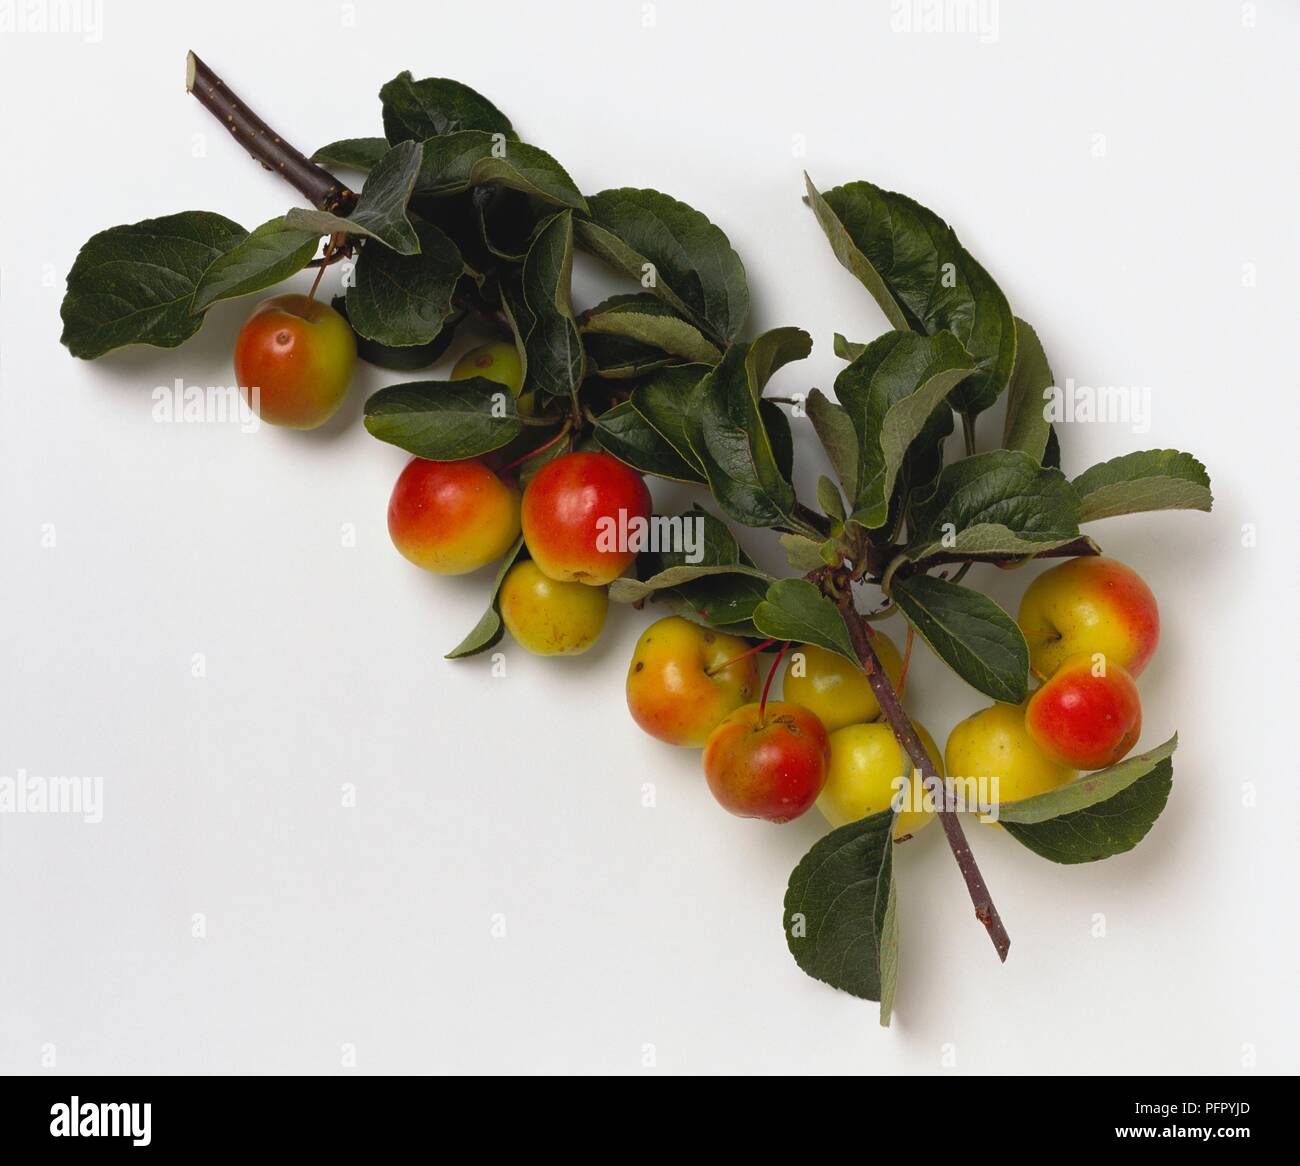 Malus 'Butterball' (Crabapple Hybrid) red and yellow berry fruit with green leaves on stem cutting Stock Photo